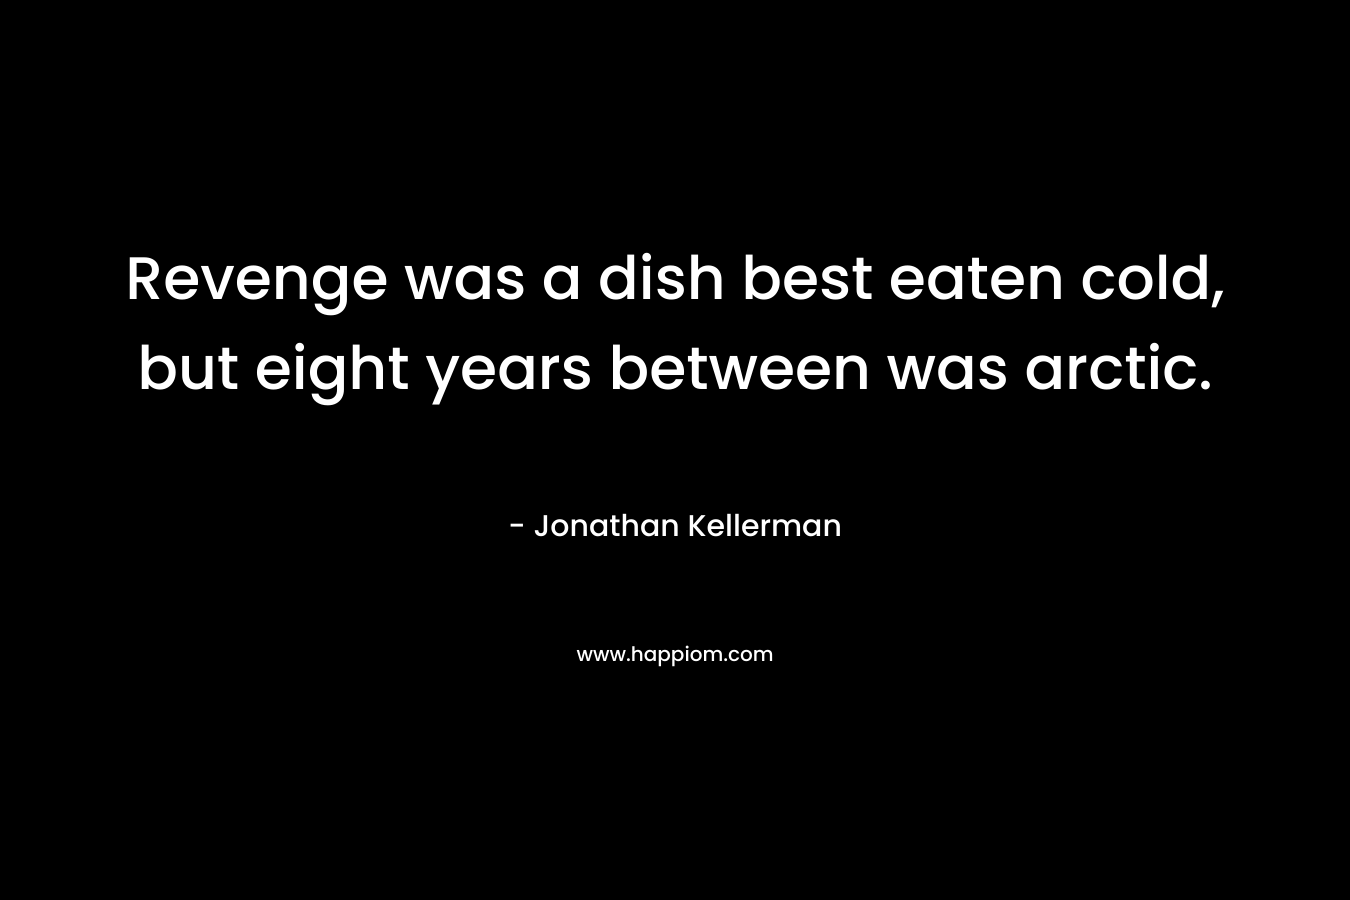 Revenge was a dish best eaten cold, but eight years between was arctic. – Jonathan Kellerman